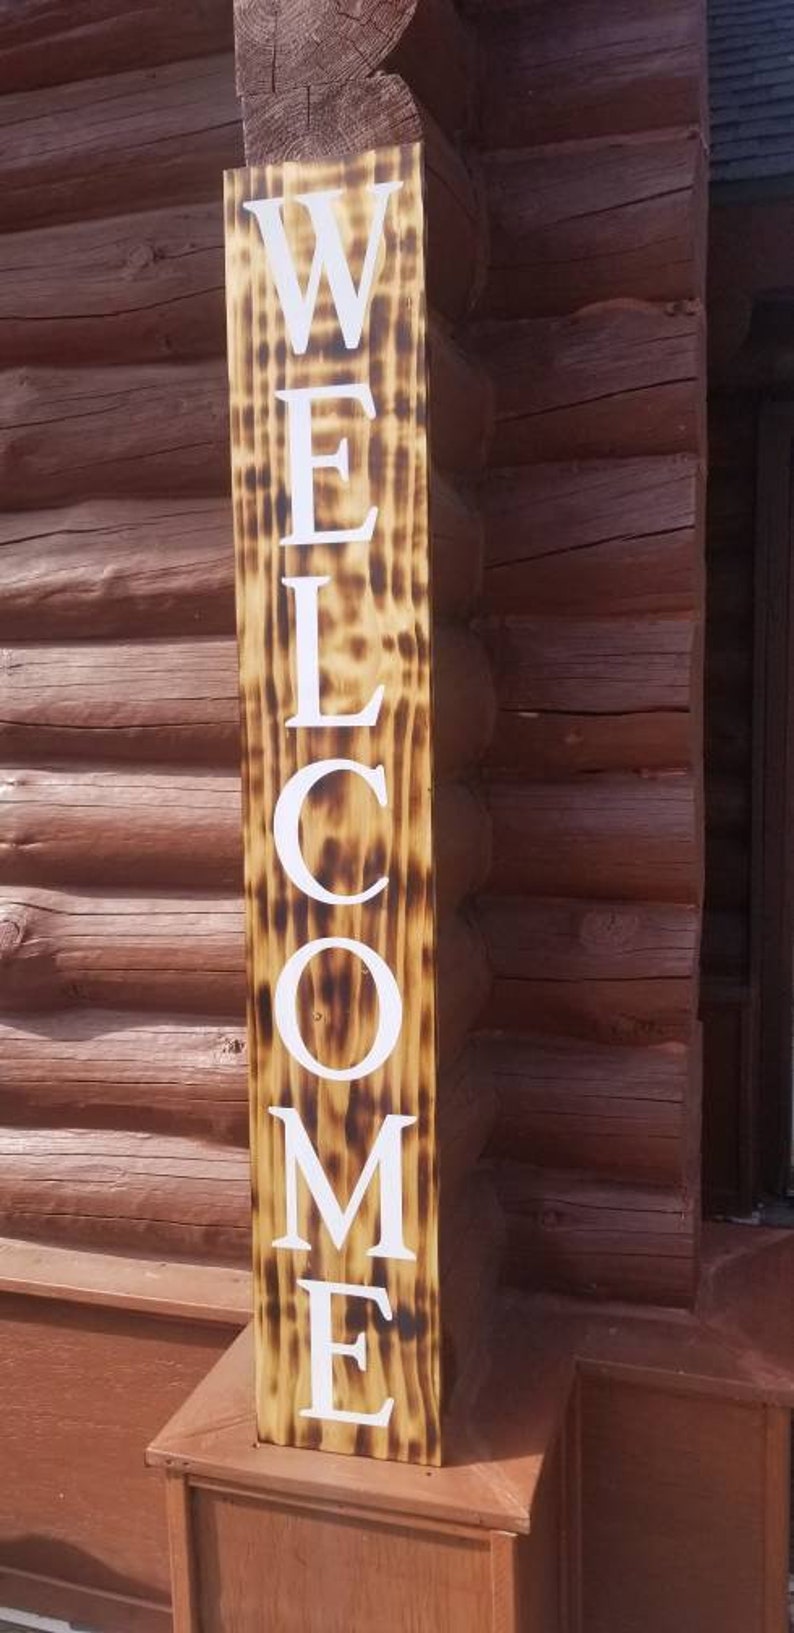 WELCOME Front porch wooden sign, front porch sign, Welcome sign, Vertical Welcome sign, entry way sign, rustic Welcome sign, Black welcome image 1